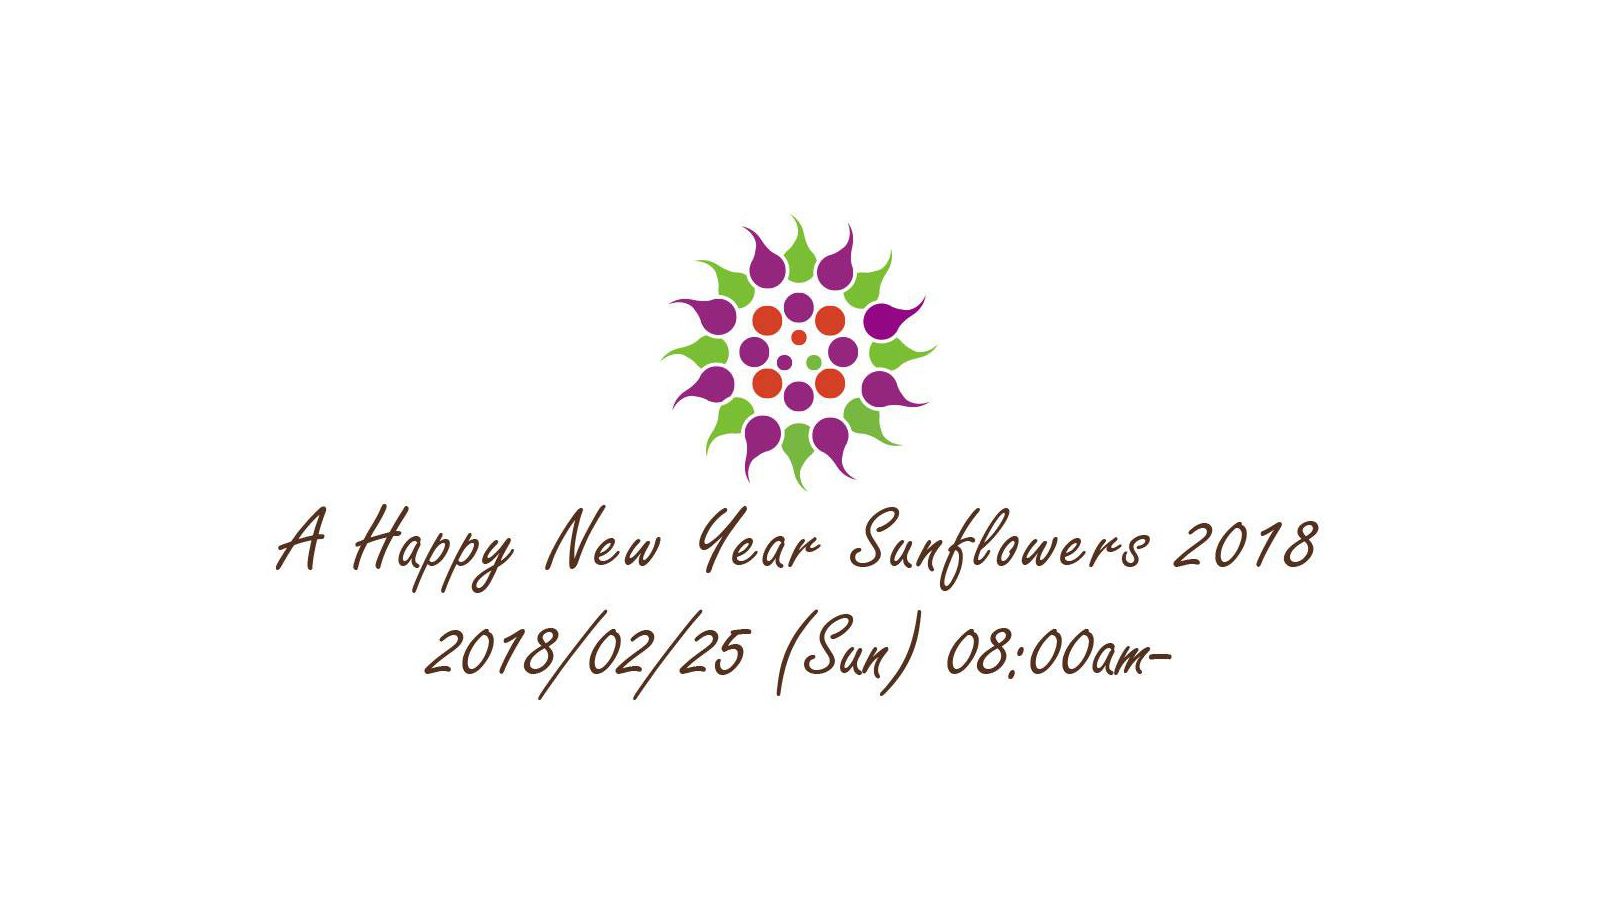 A Happy New Year Sunflowers 2018